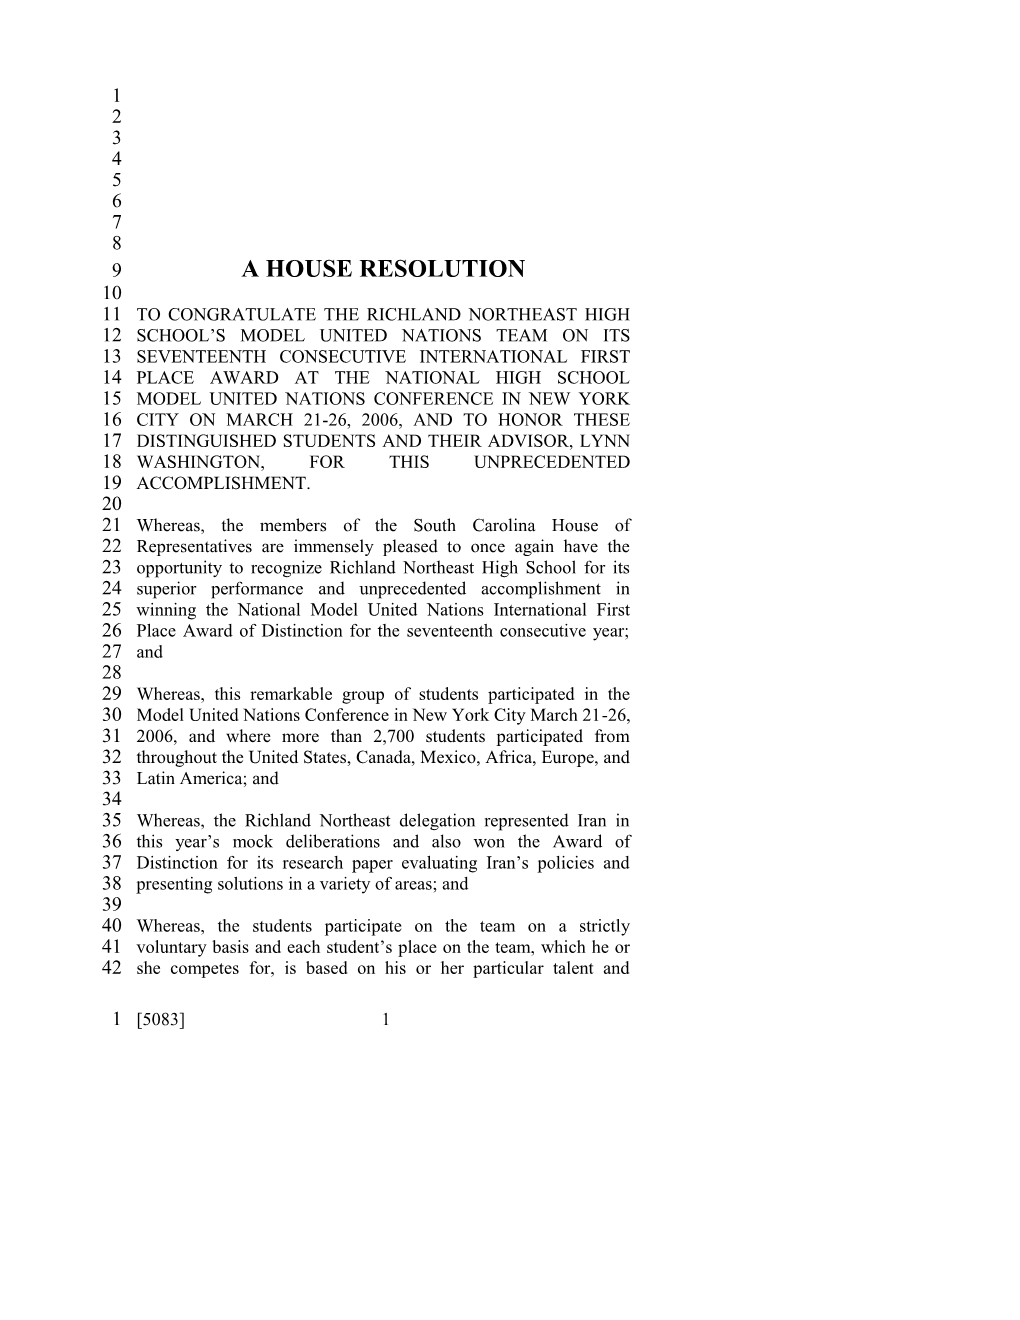 A House Resolution s14